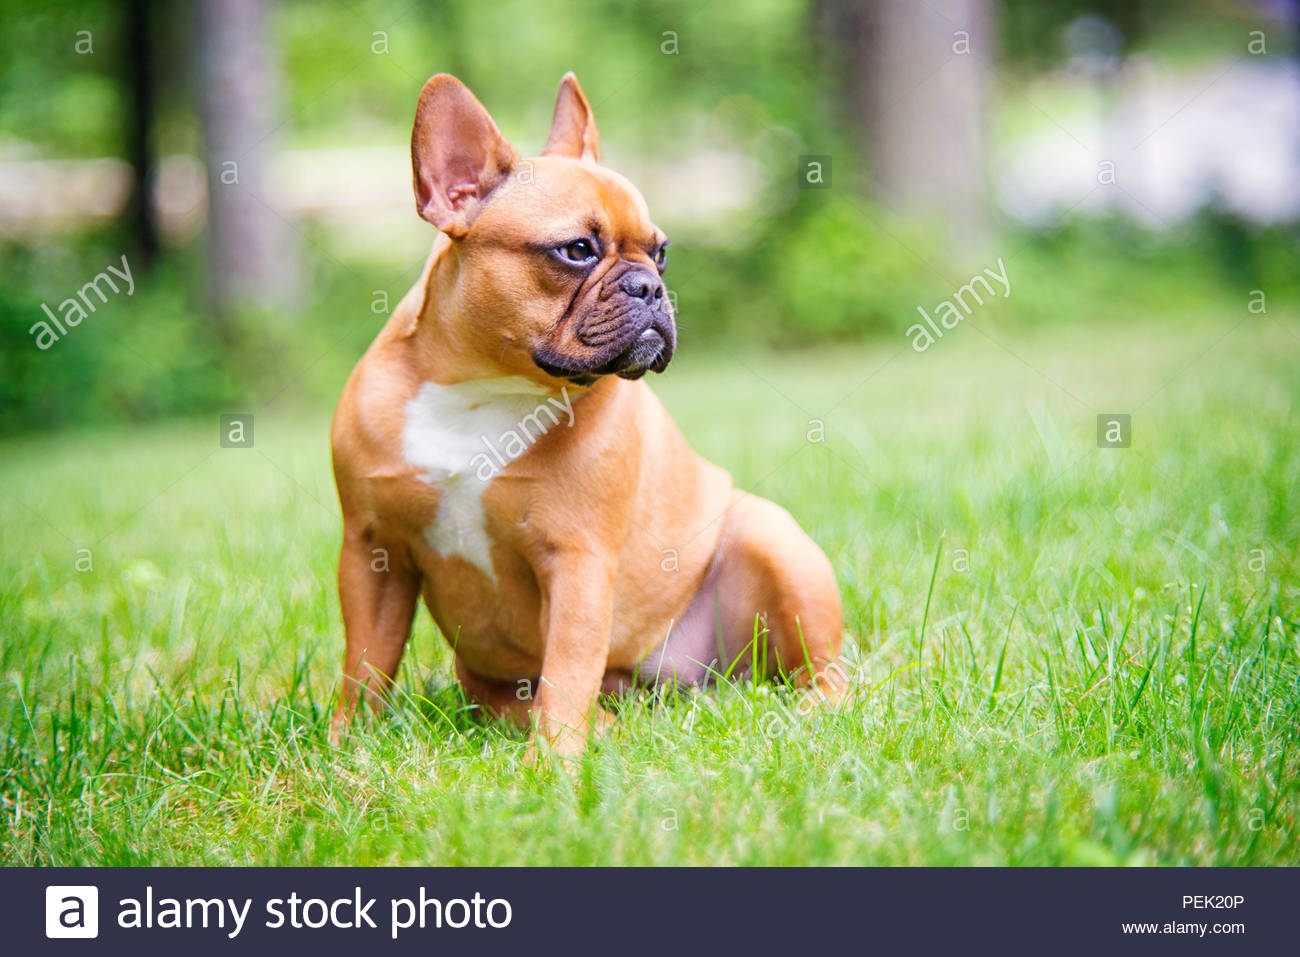 Red Fawn French Bulldog Sitting In The Grass With Trees Blurred